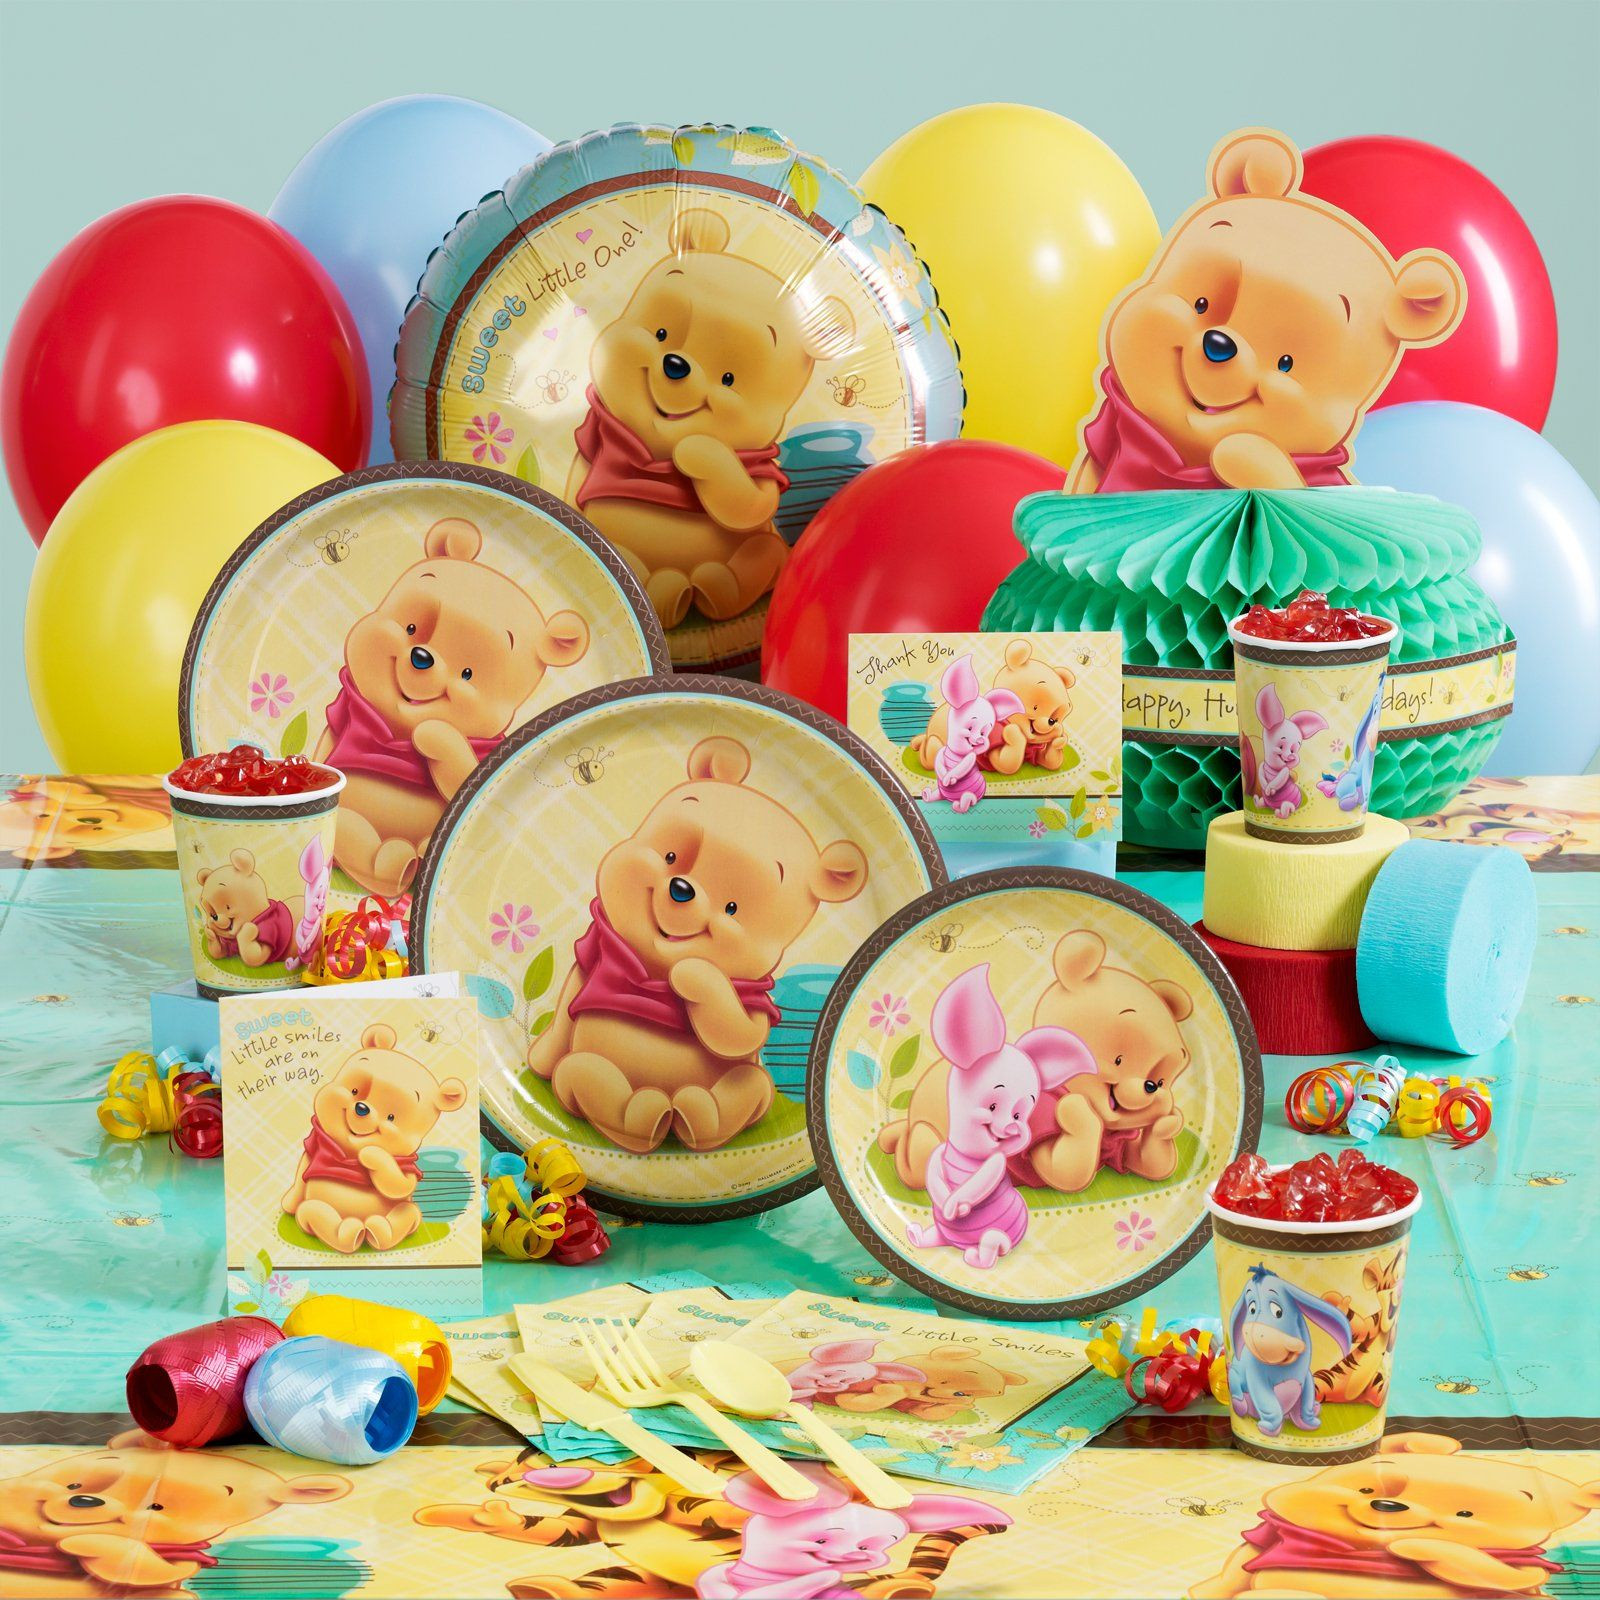 Winnie The Pooh Baby Shower Decorations Party City
 Baby Boy Shower Attractive Cute Winnie The Pooh Baby